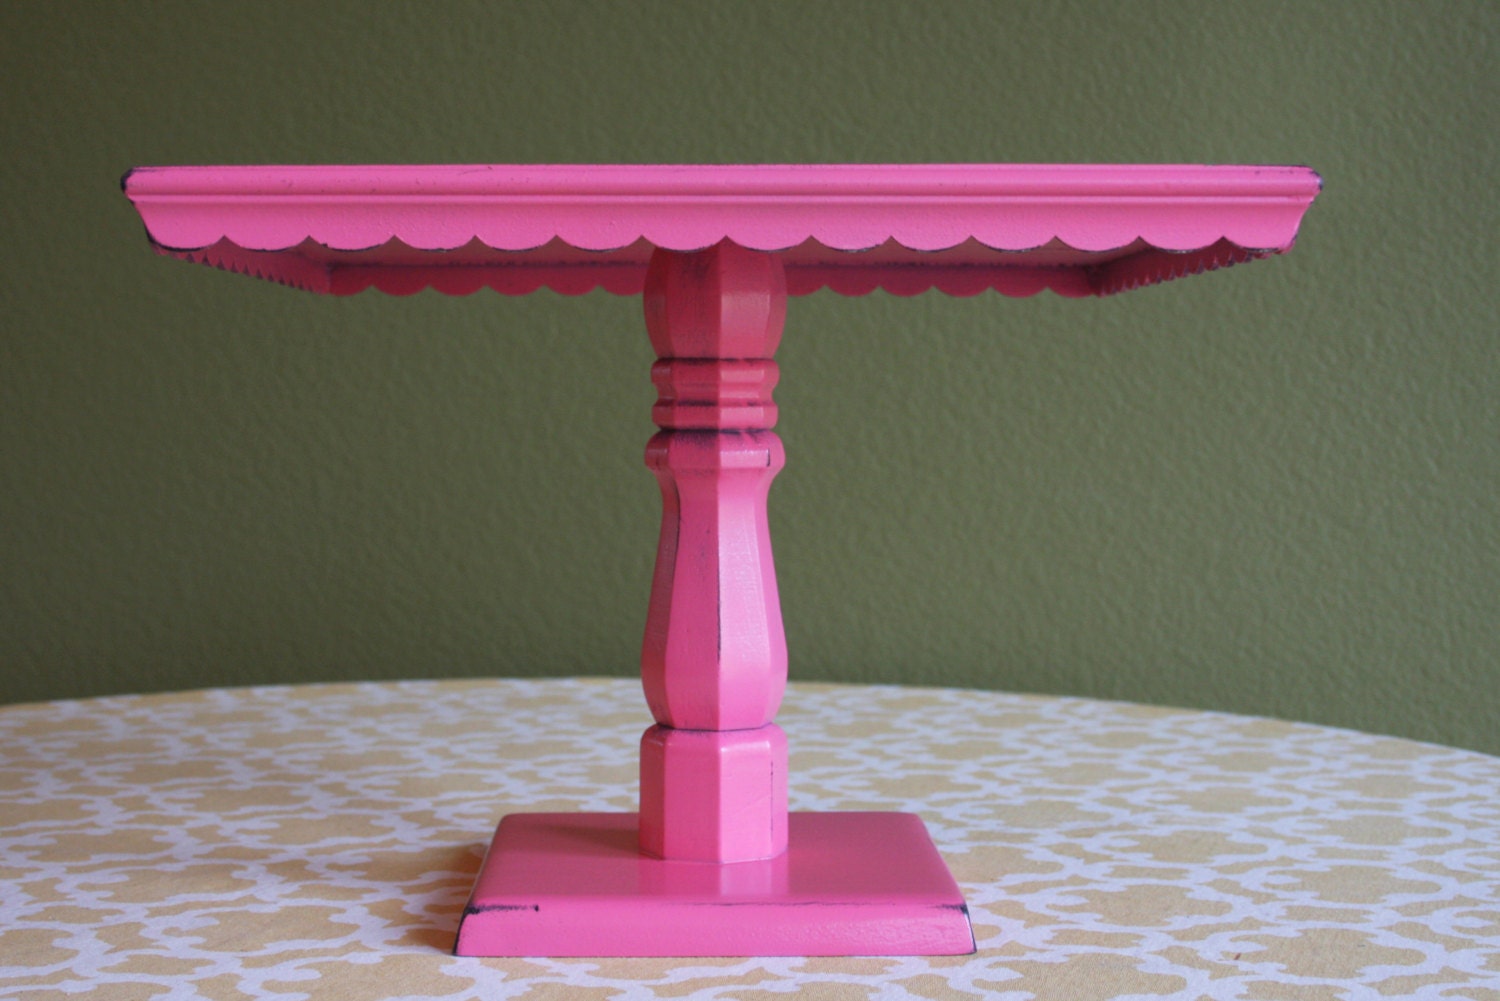 14x14 Shabby Chic Cake stand shown in Hot pink